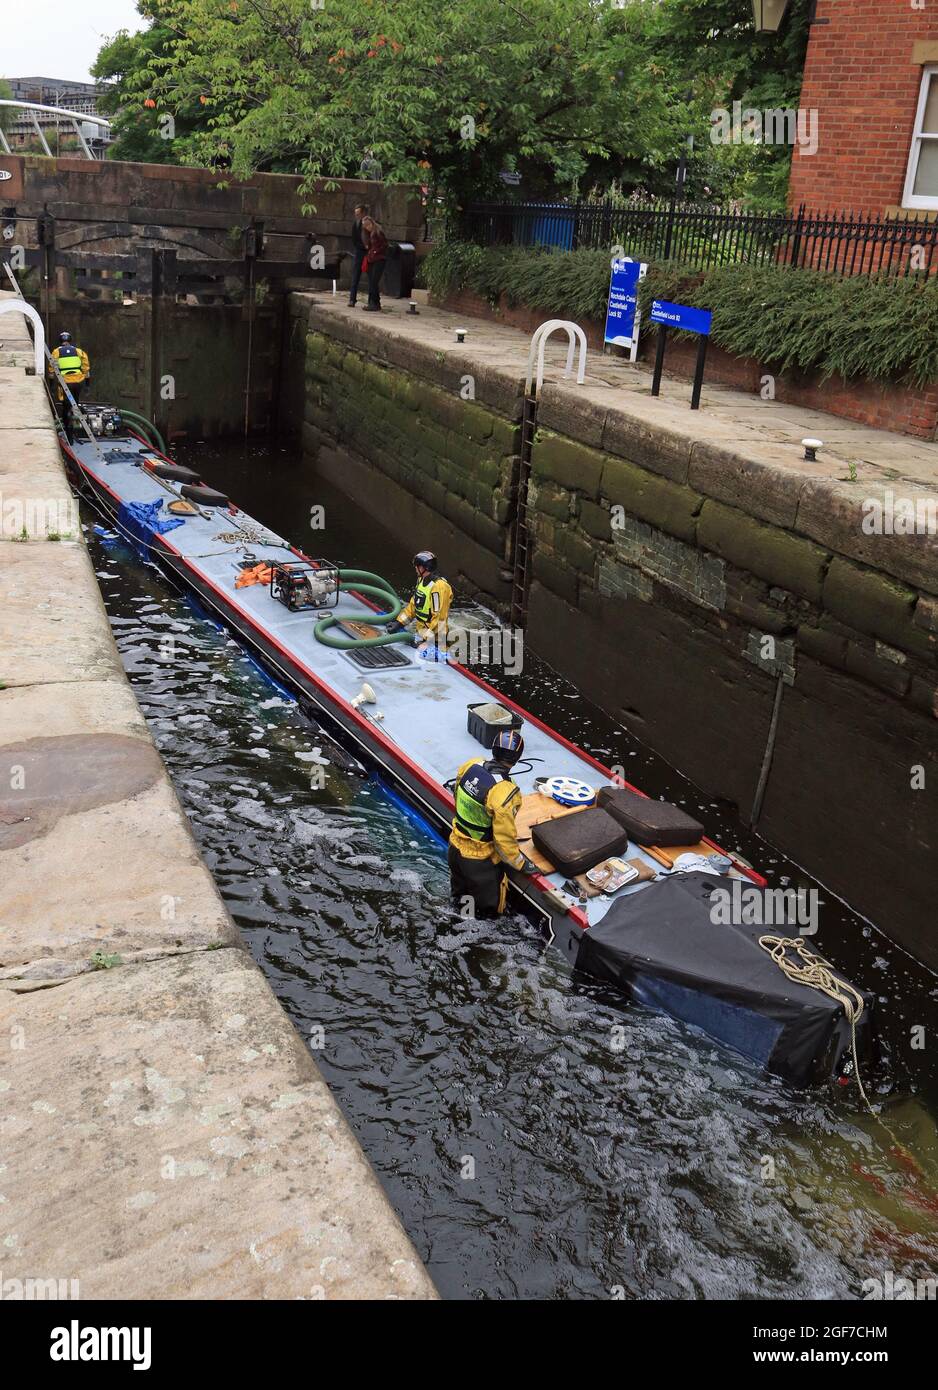 Water is starting to be pumped from a sunken canal boat from lock 92 of the Rochdale canal to re float it. This is image 3 of the rescue operation Stock Photo